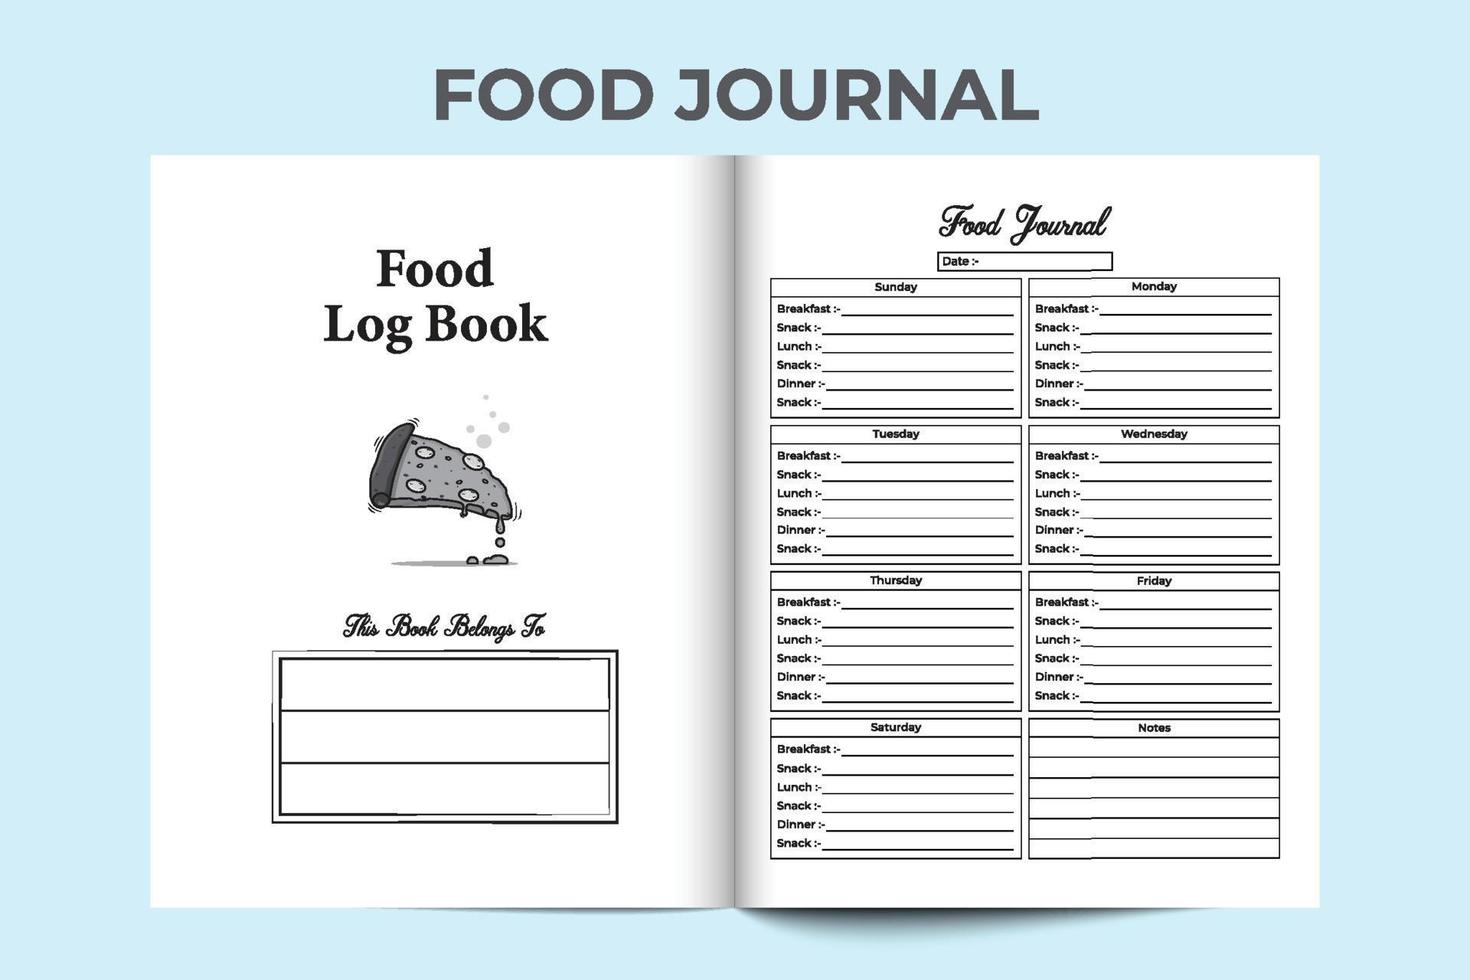 Food journal interior. Daily meal habit tracker and food information checker template. Interior of a logbook. Food scheduling and daily meal planner notebook interior. Weekly food info tracker. vector